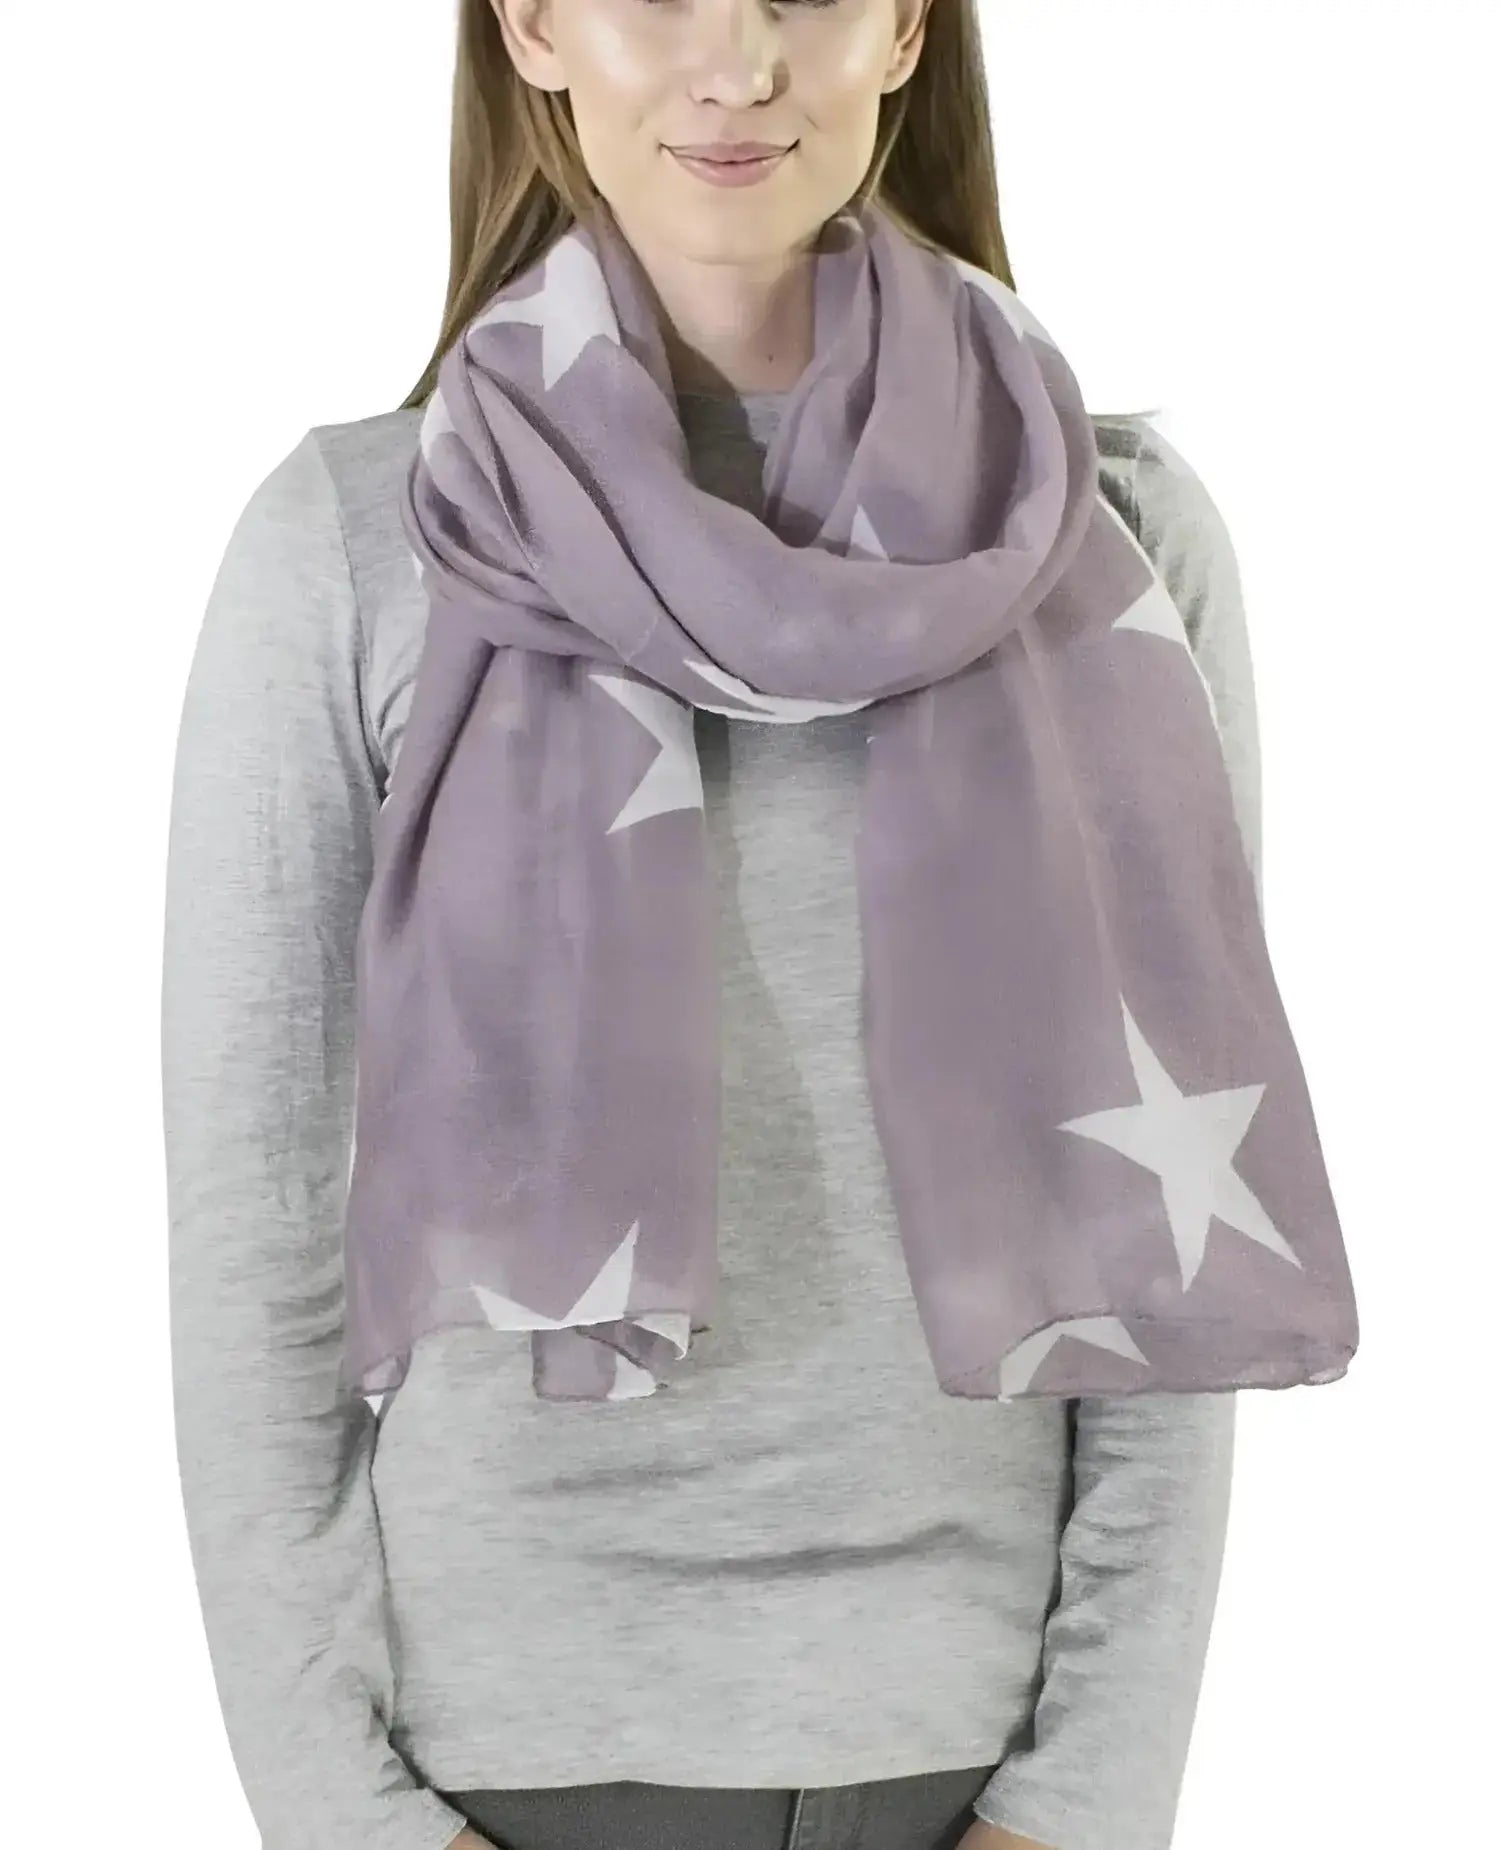 Retro star oversized scarf with white stars on purple background from Star Oversized Scarf Shawl for All Seasons